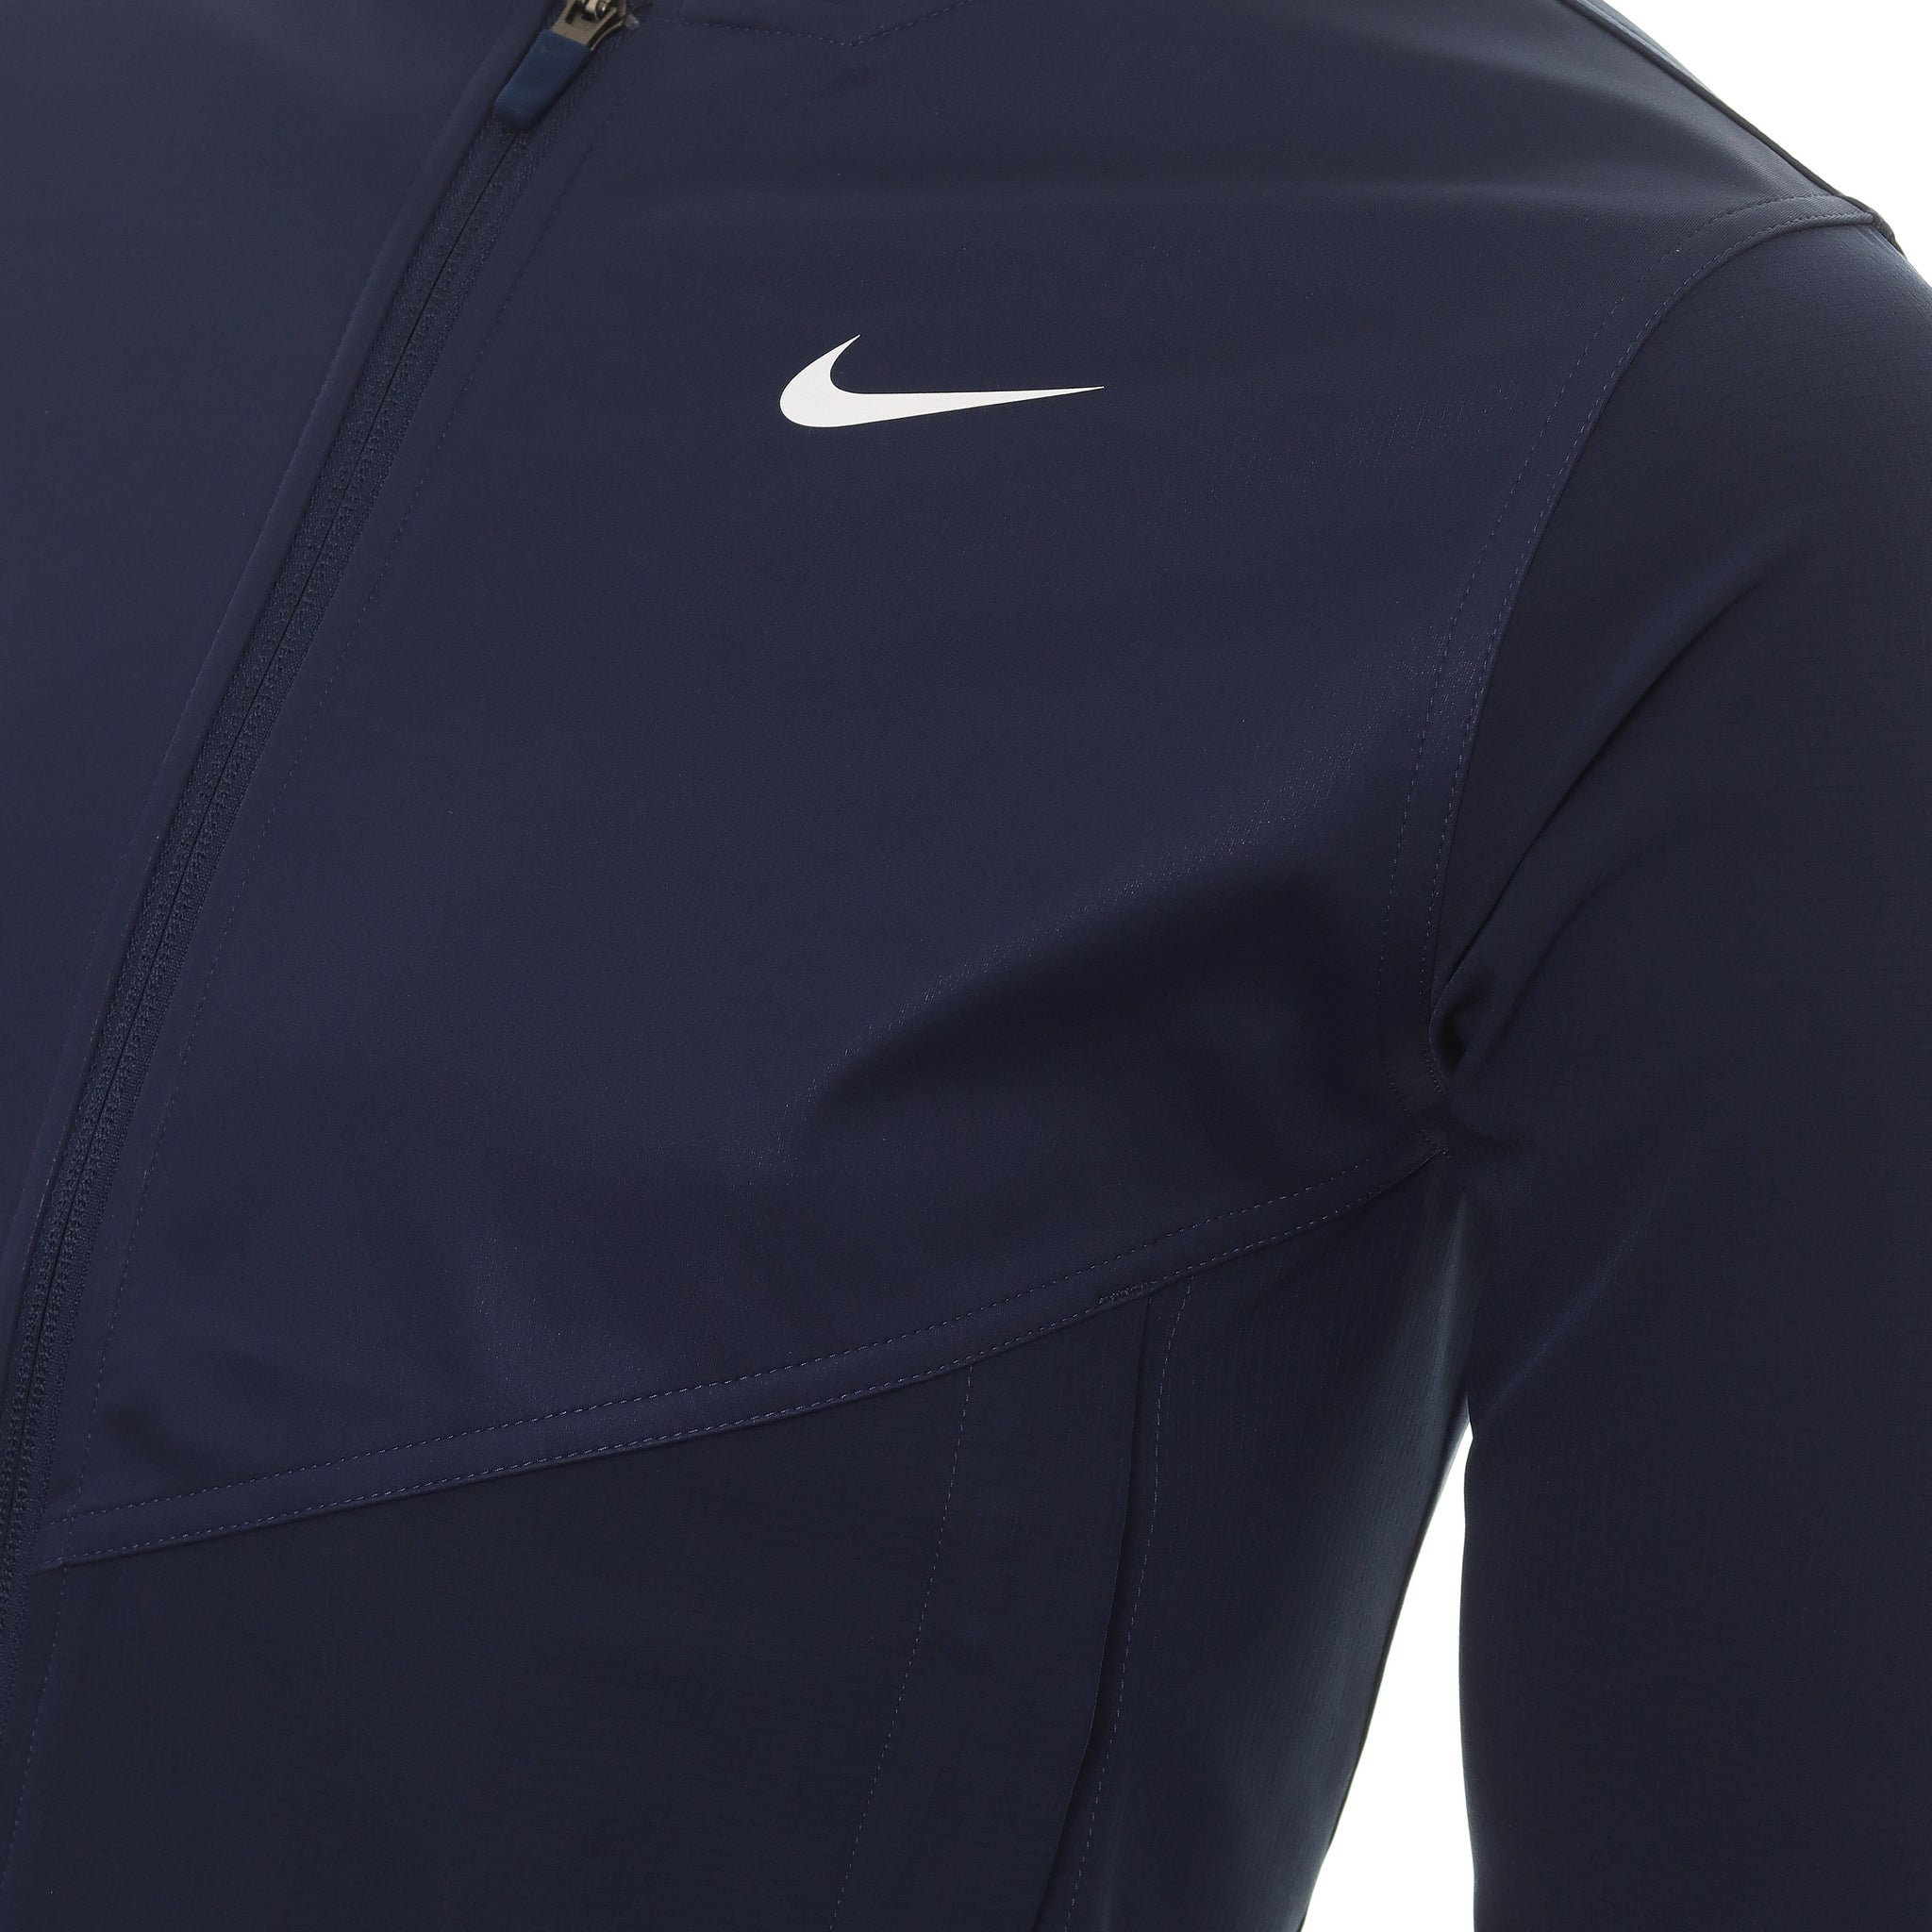 Nike Golf Repel Tour Packable Jacket DV1663 Midnight Navy 410 | Function18